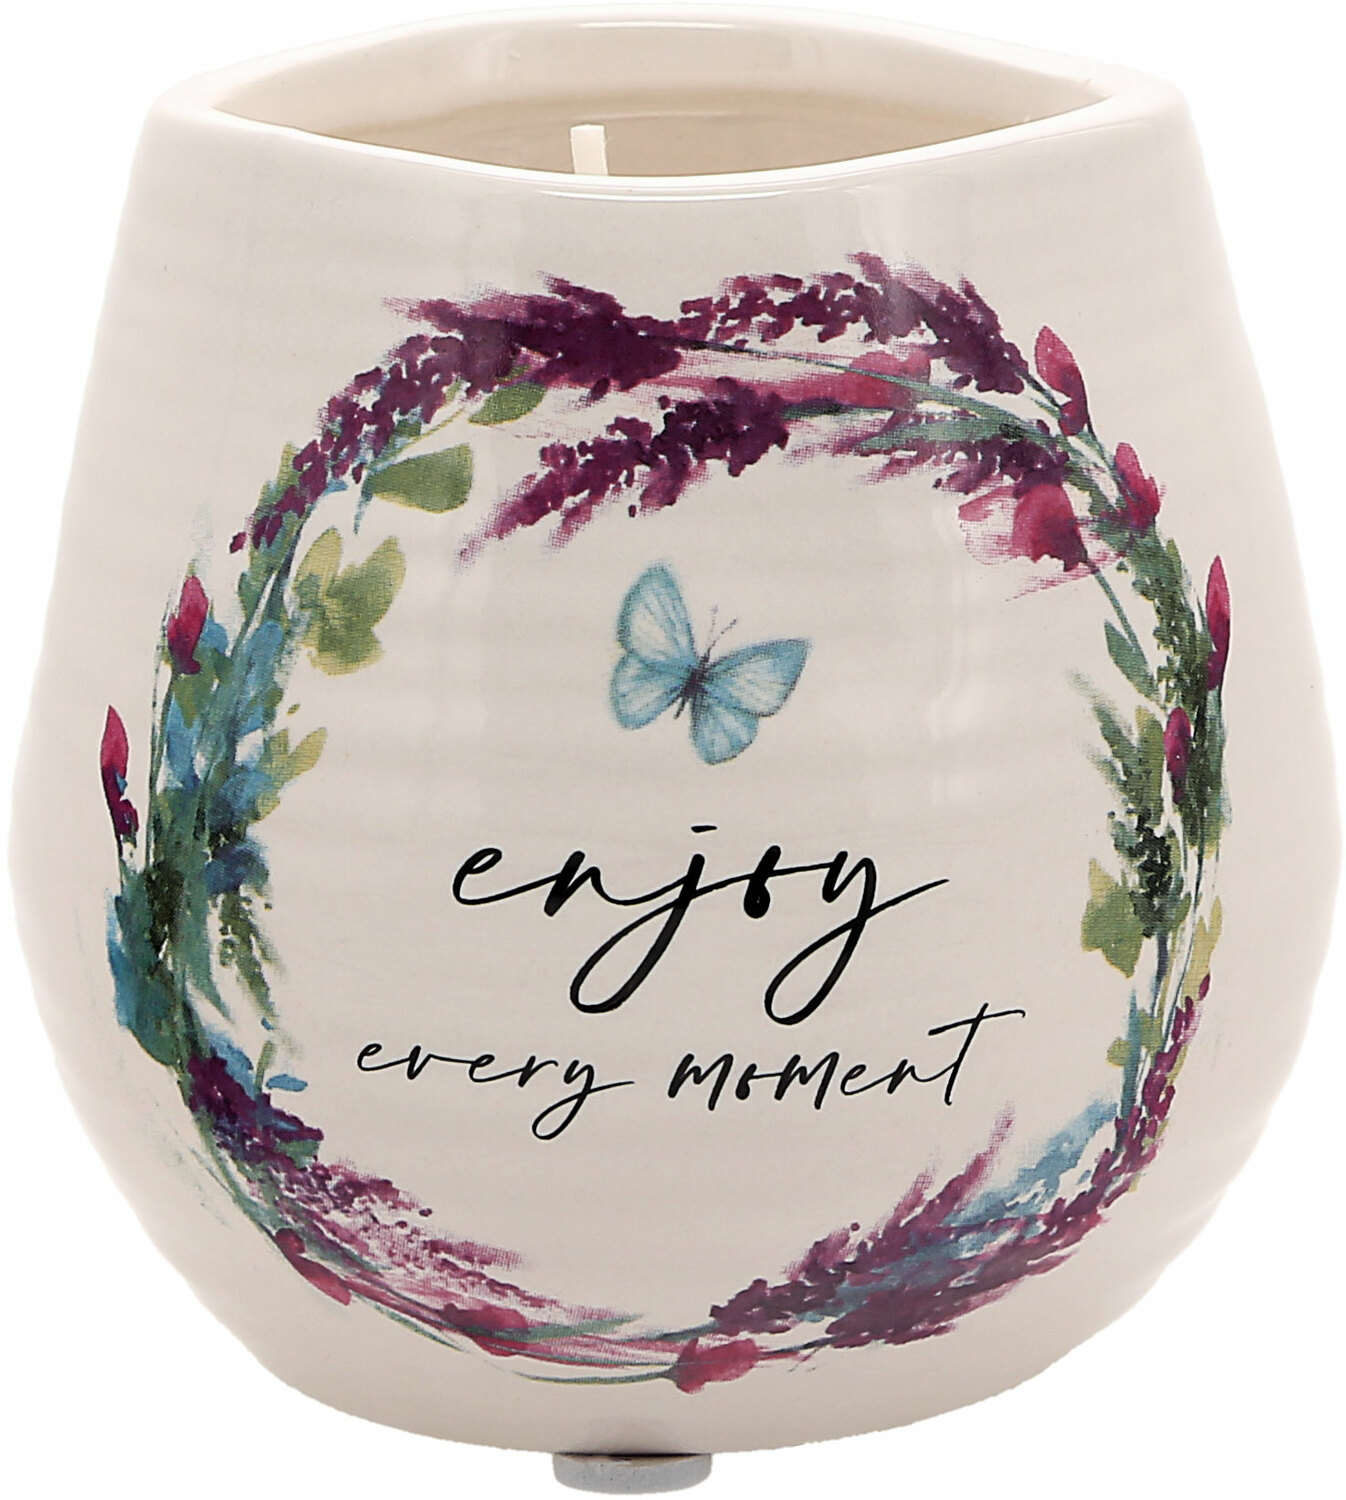 Enjoy by Meadows of Joy - Enjoy - 8 oz - 100% Soy Wax Candle
Scent: Tranquility